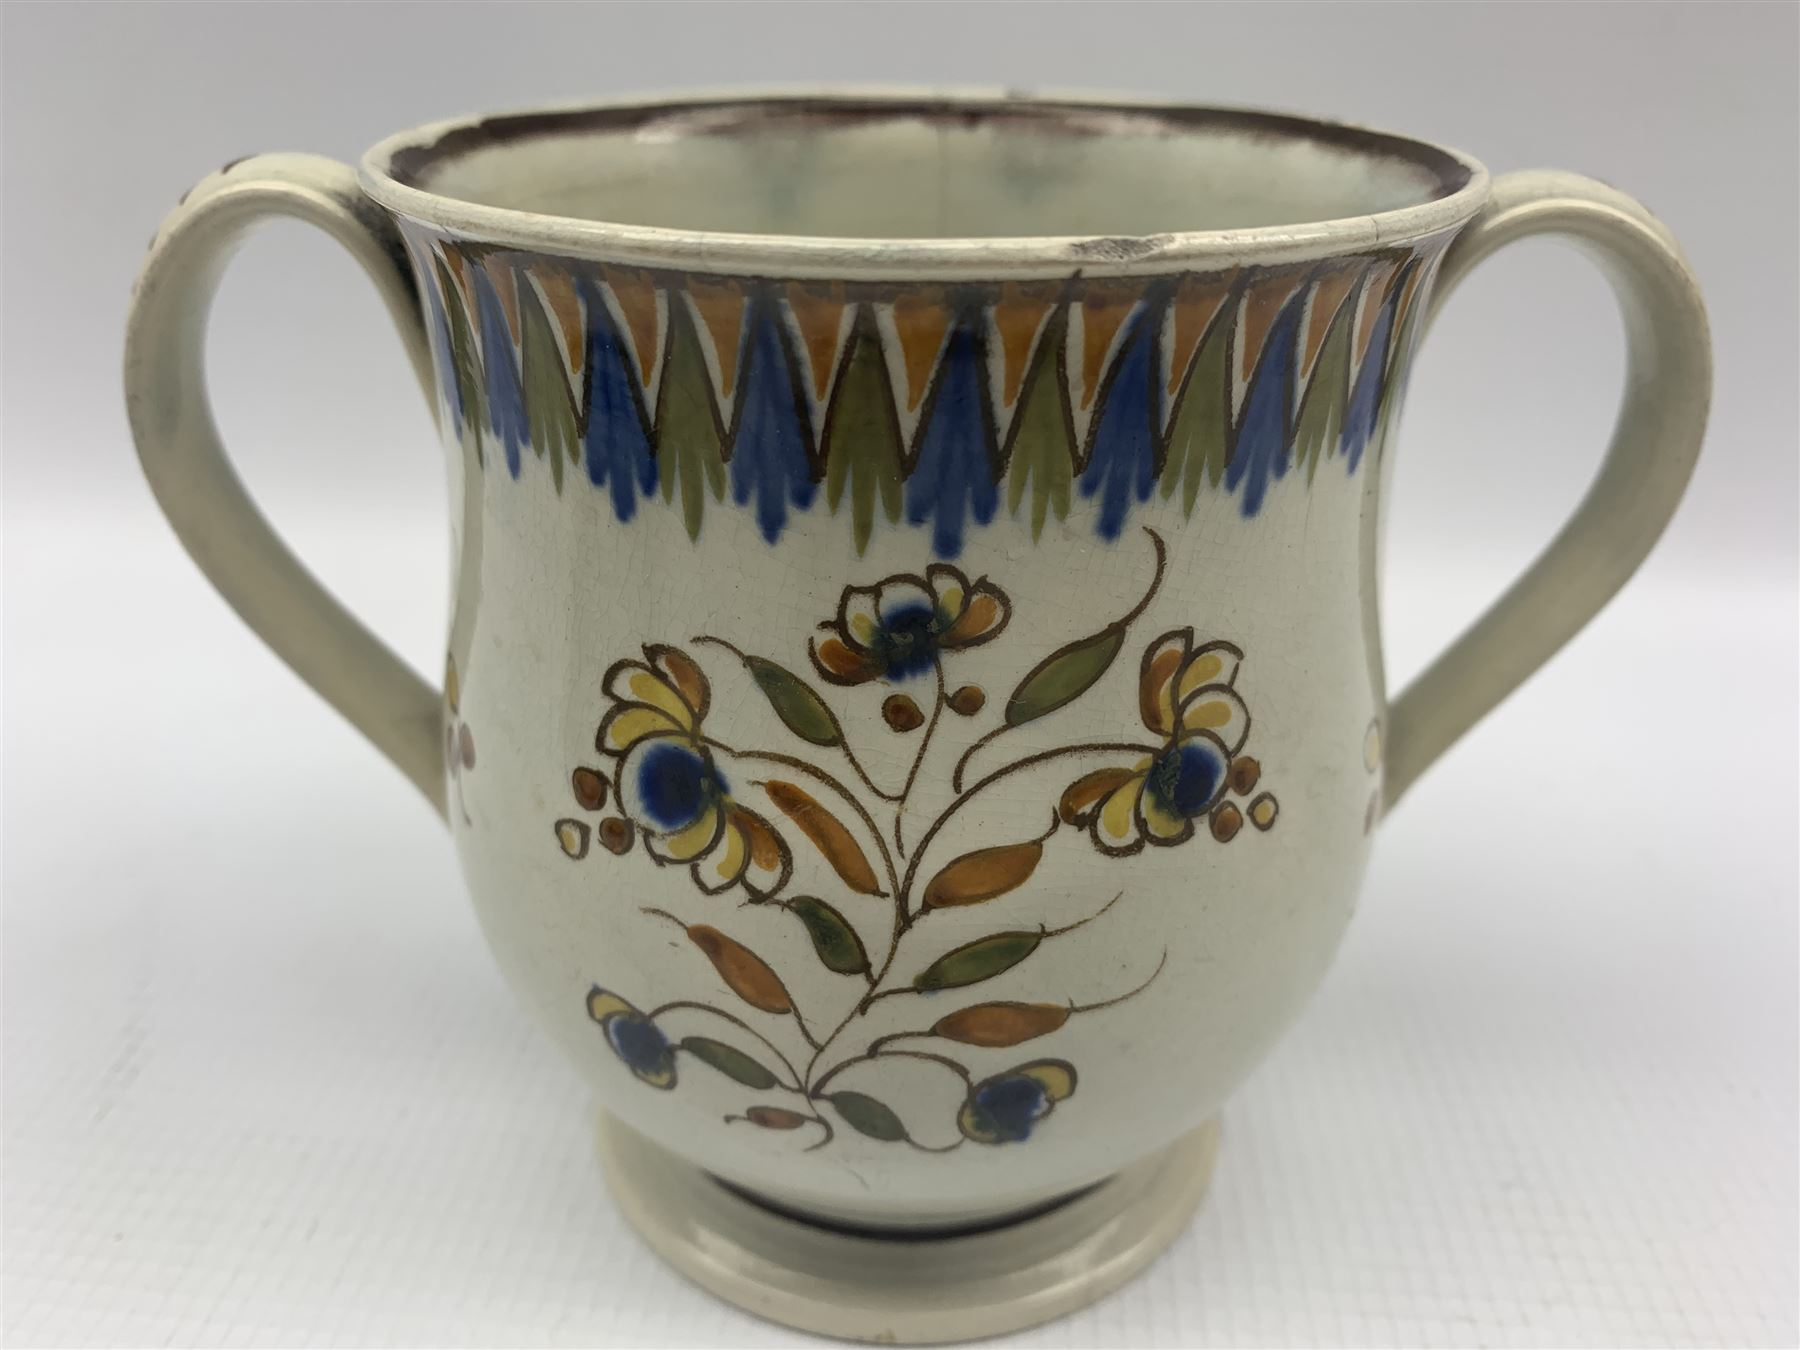 18th century and later porcelain comprising two handled creamware loving cup with floral decoration - Image 2 of 7